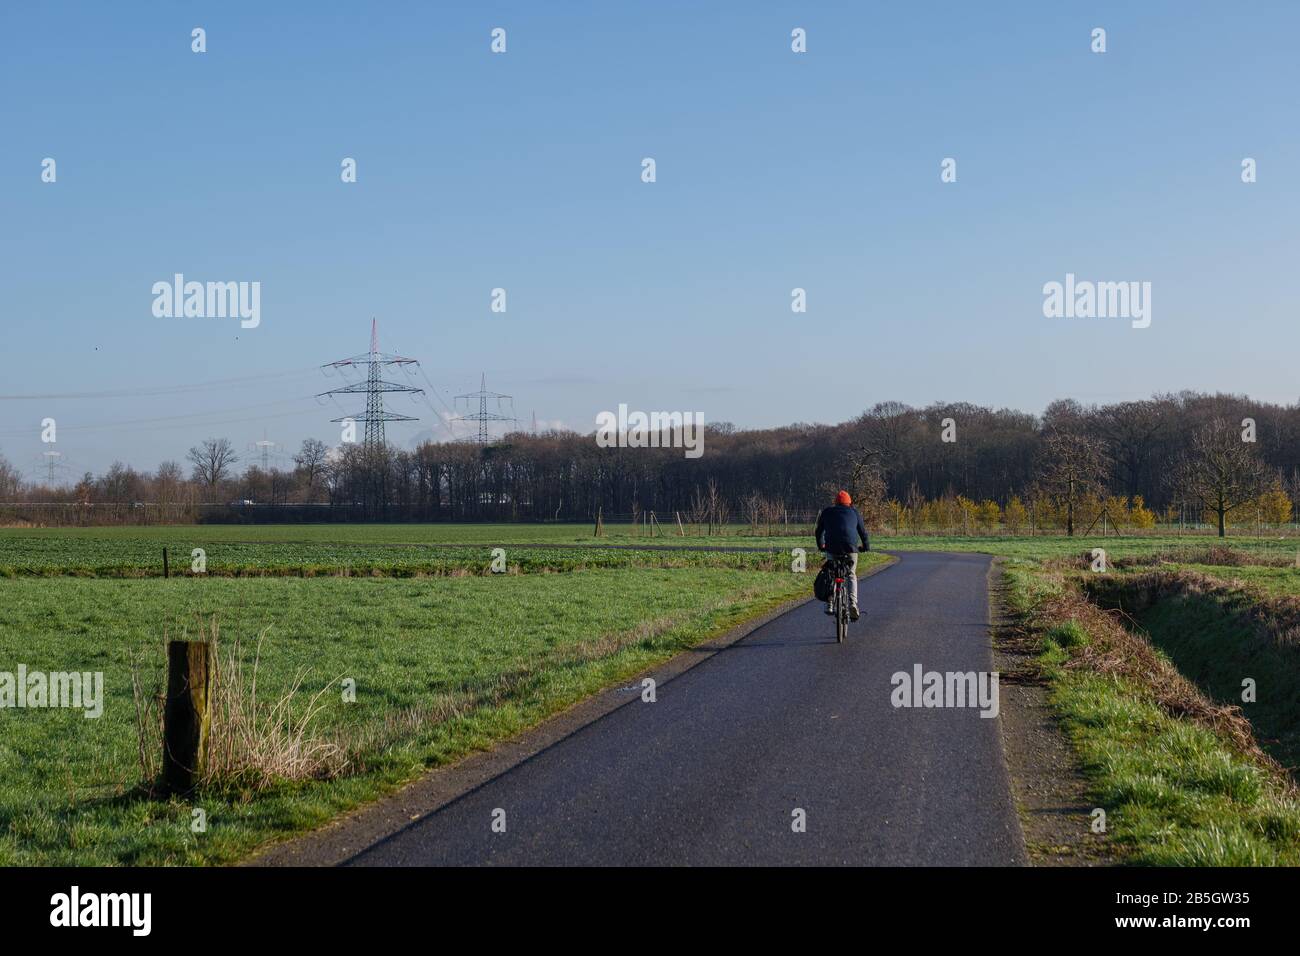 Outdoor sunny view of cyclist ride a bicycle on small road in countryside area with agricultural field and meadow in winter season against blue sky. Stock Photo